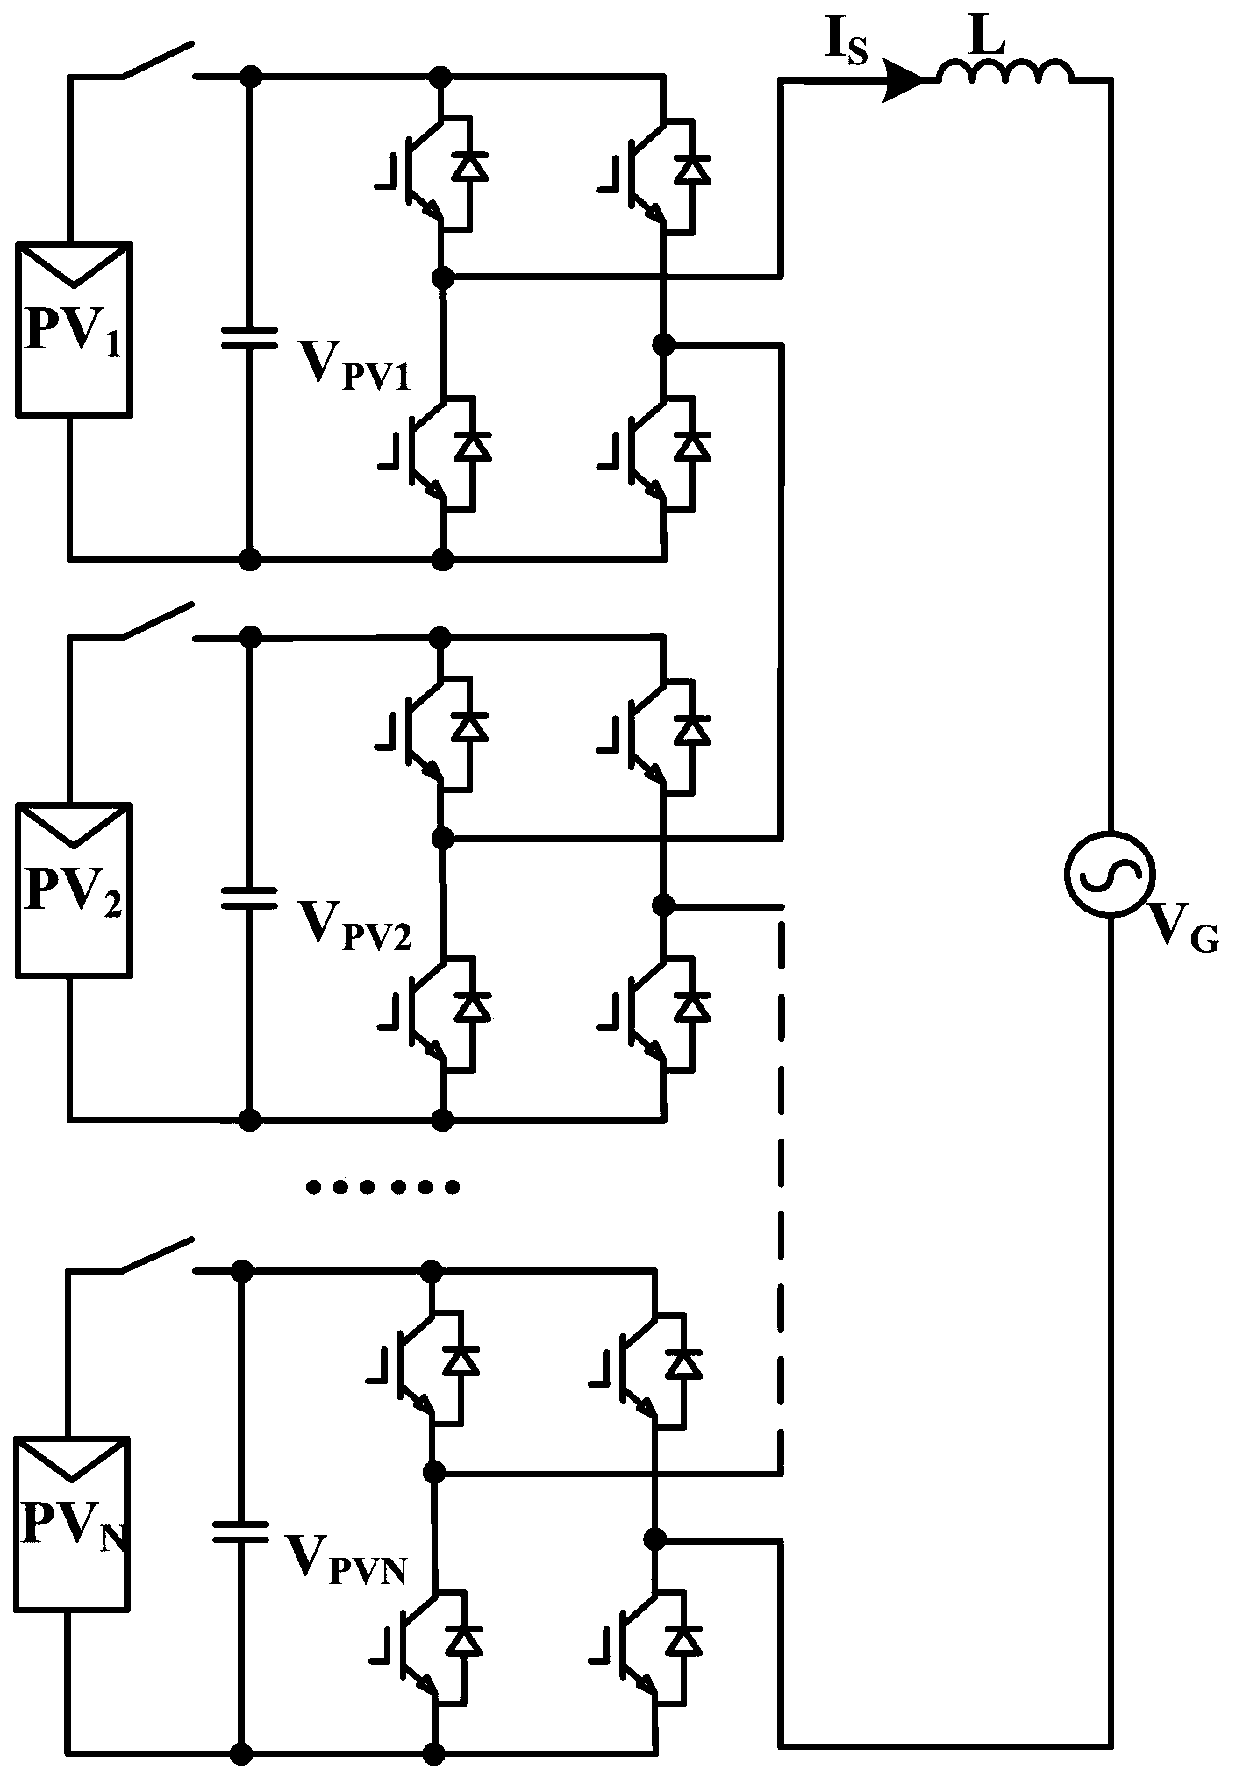 Power Balance Control Method for Reducing DC Voltage Fluctuation of Cascaded H-Bridge Inverters